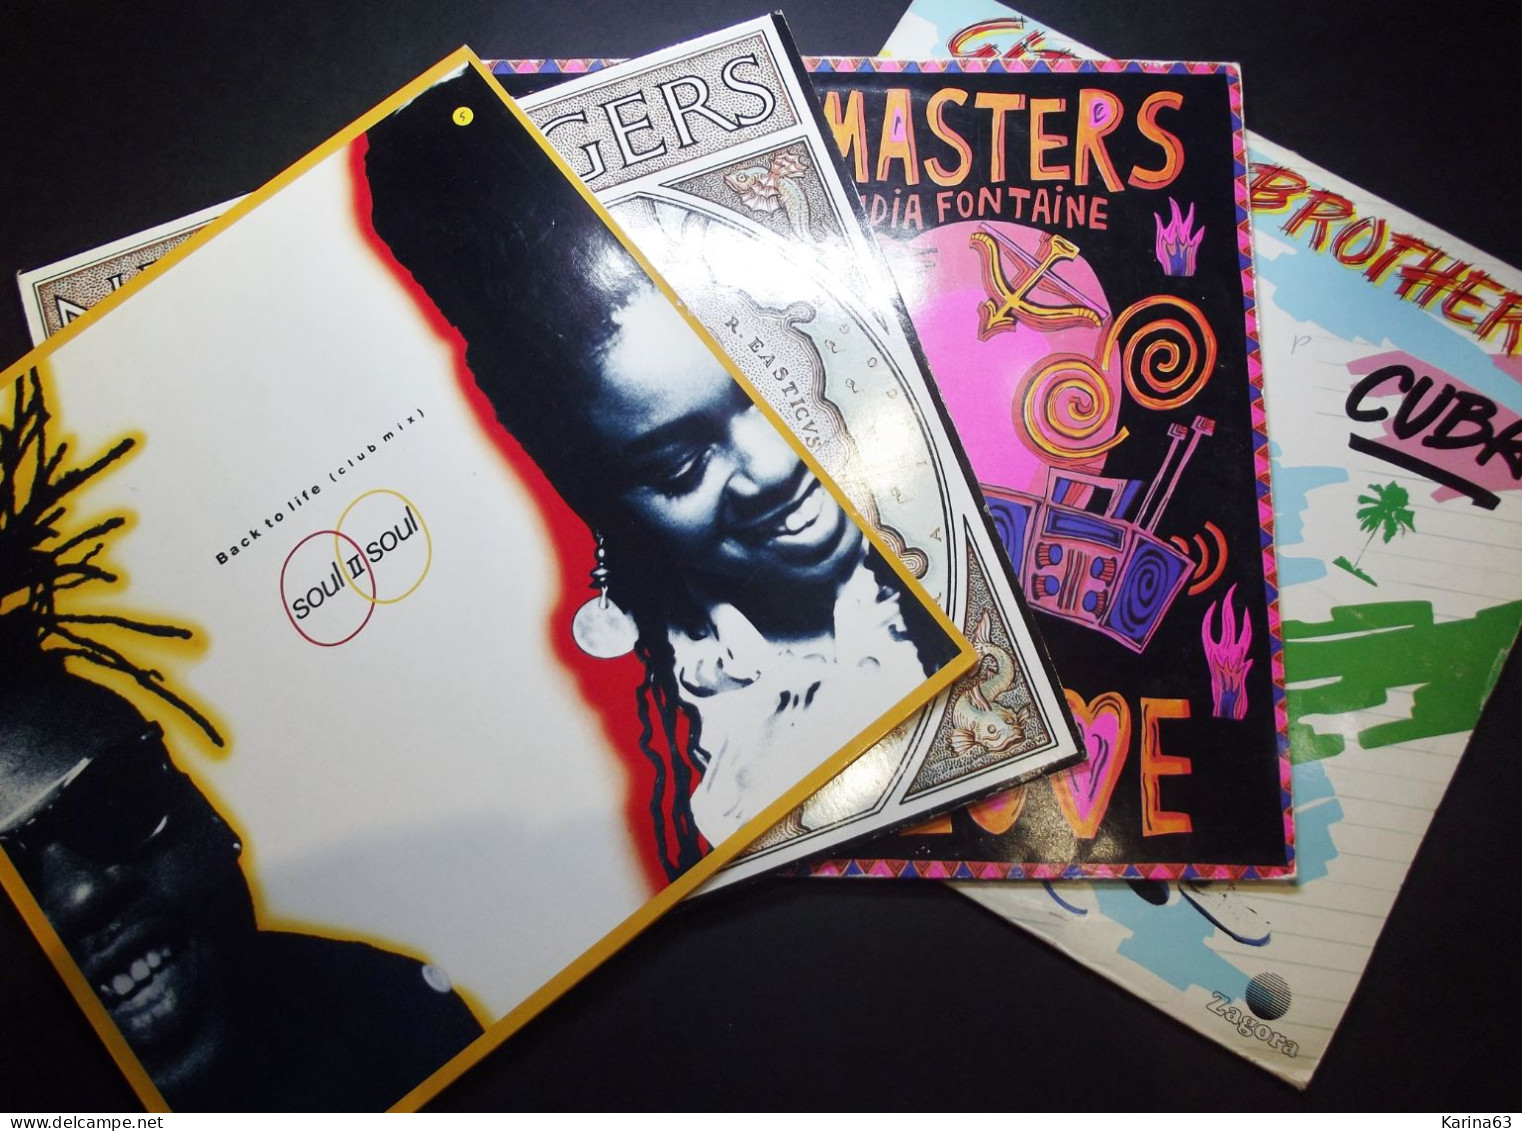 Lot 4 albums : Beatmasters (maxi) - Soul to Soul (Maxi) - Nile Rodgers (lp)- Gibson Brothers Cuba (lp)